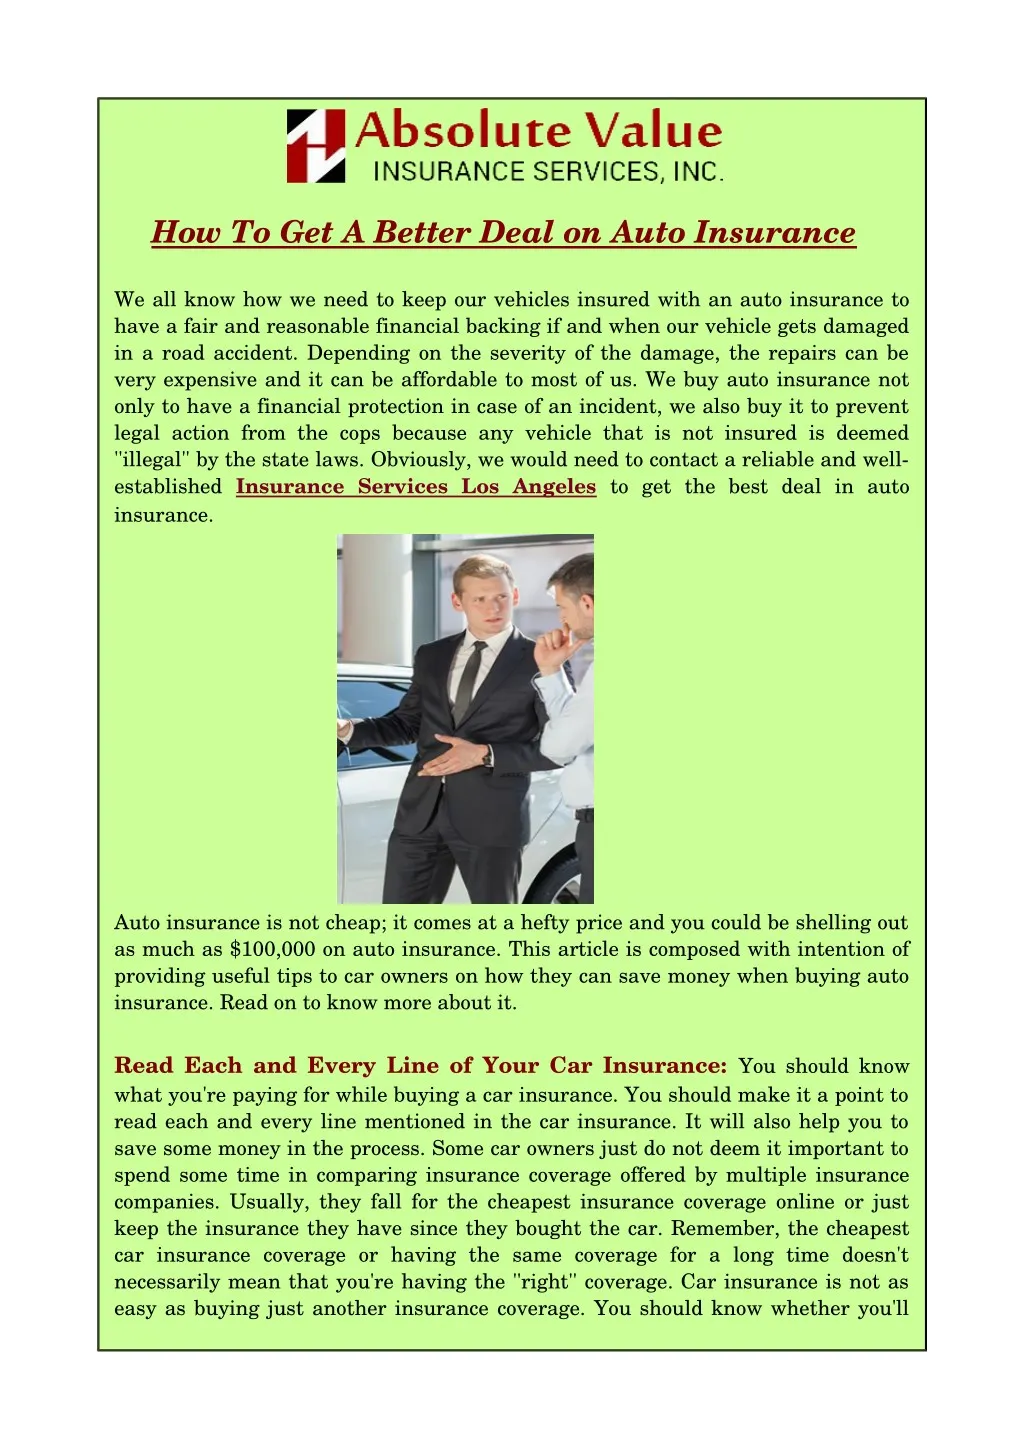 how to get a better deal on auto insurance